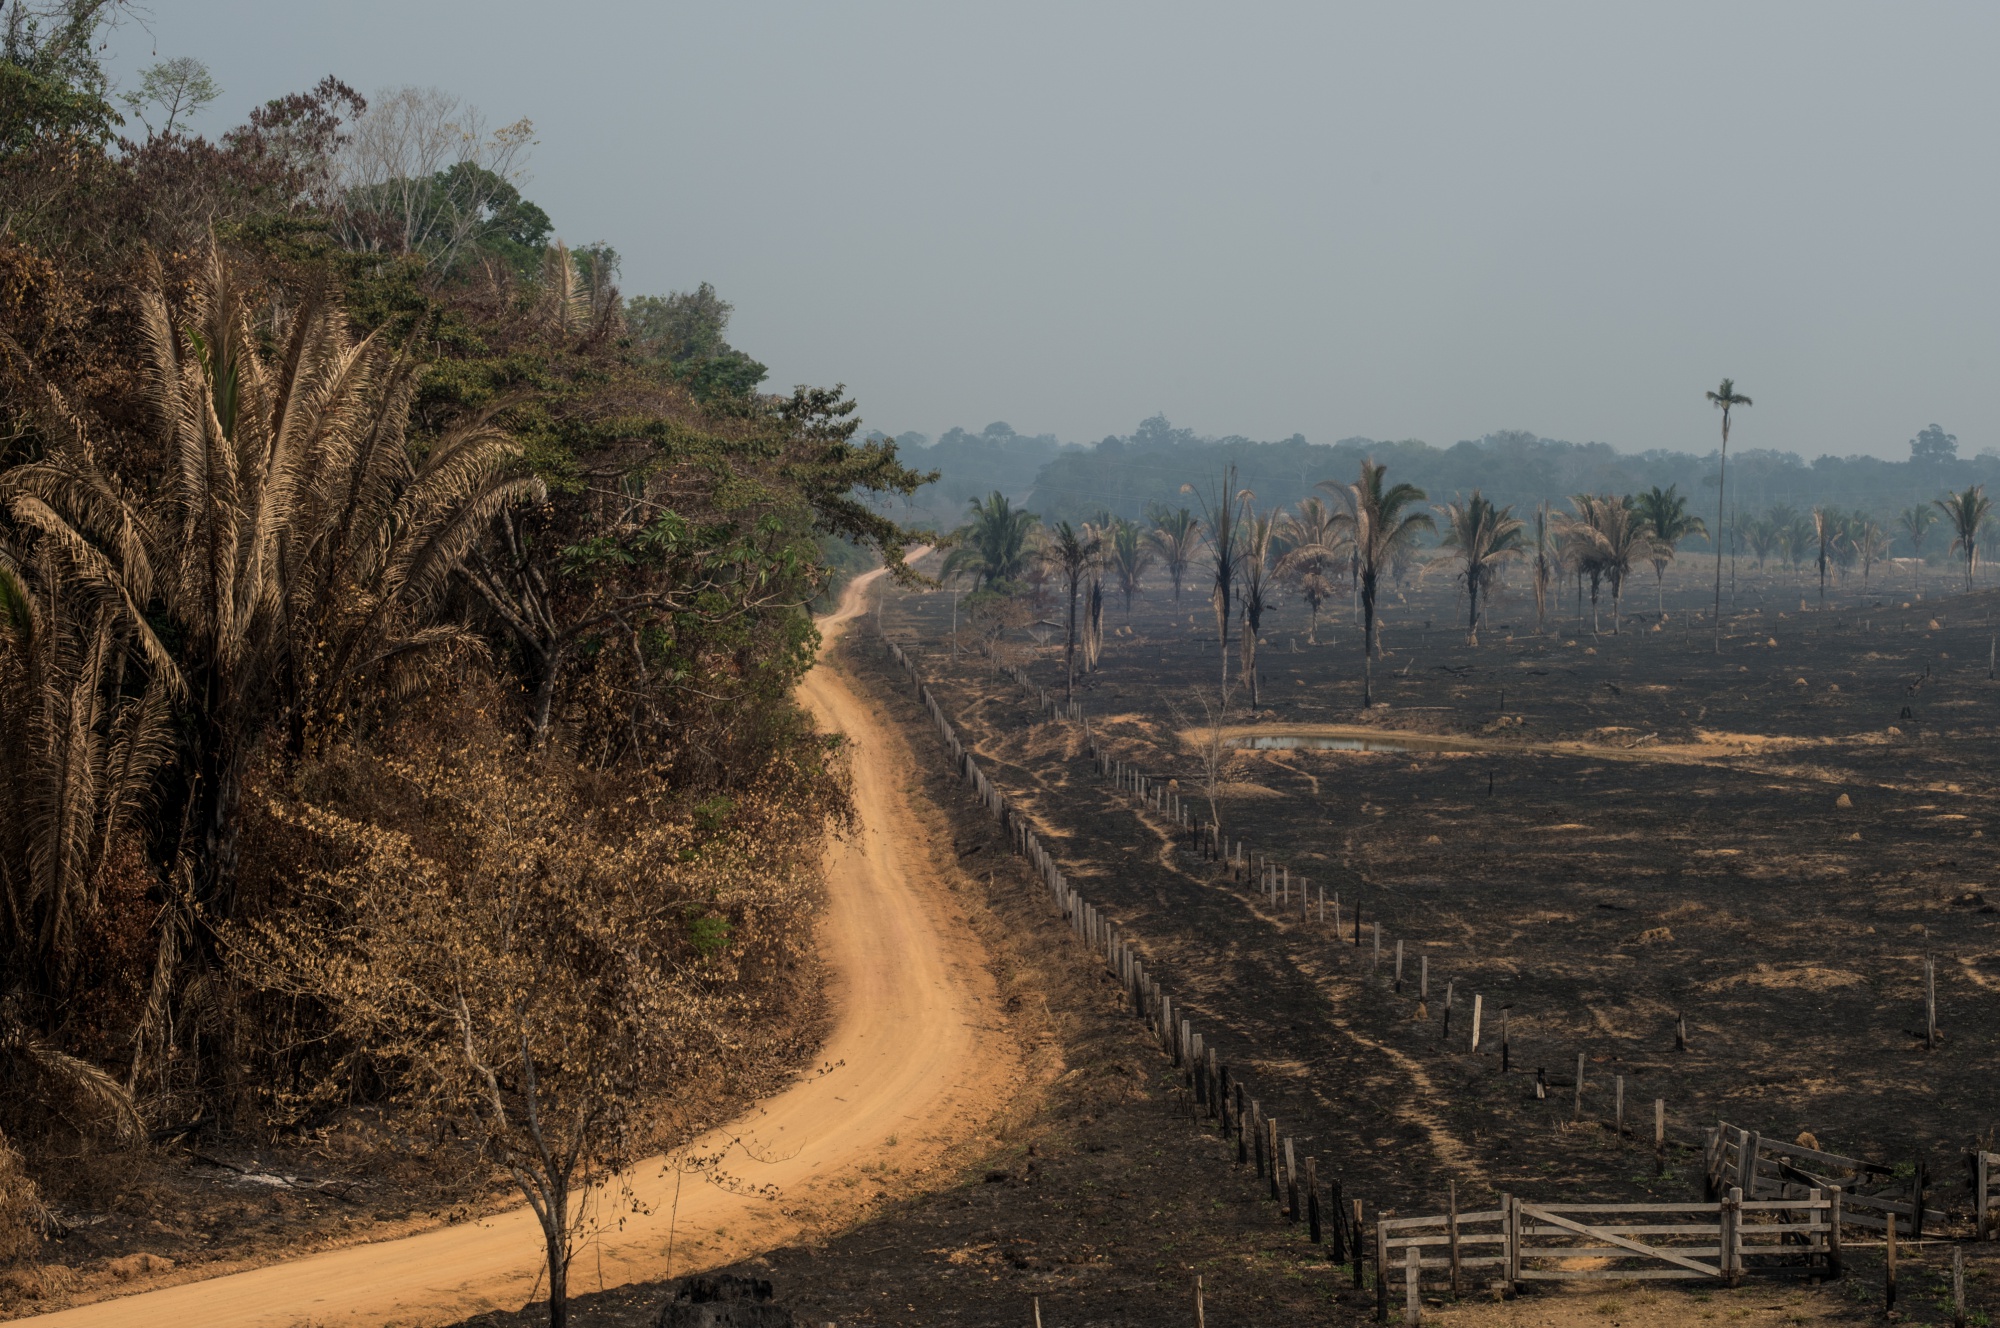 A cattle farm scorched by wildfires beside forest in Brazil in 2019.